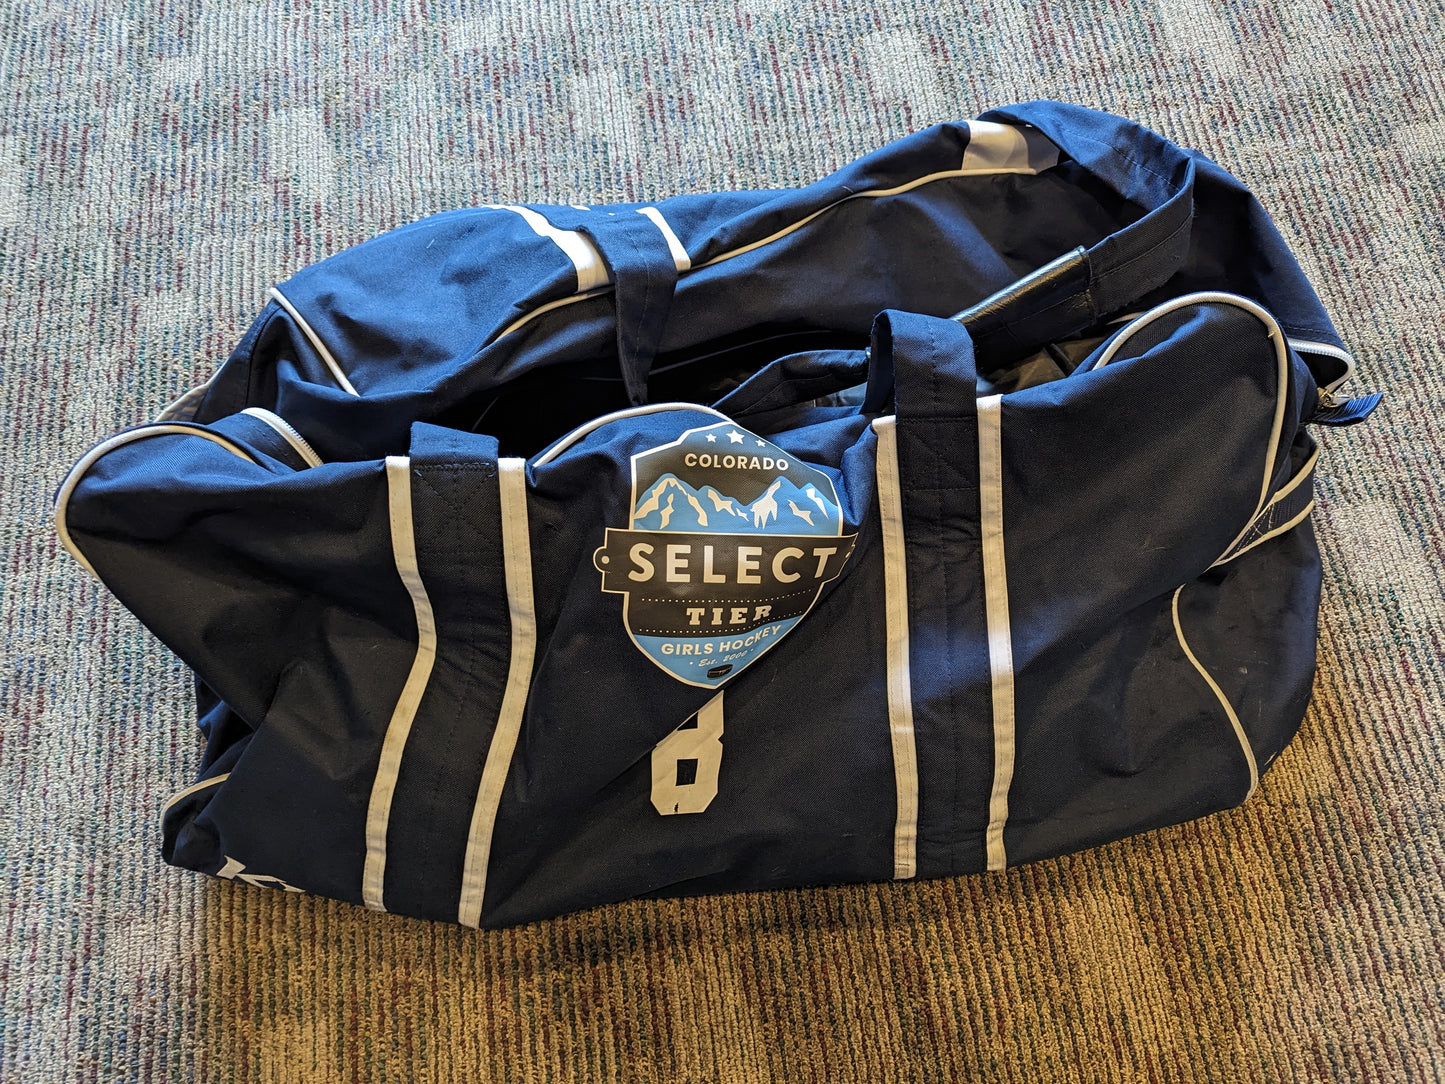 Select Girl's Hockey Gear Duffle Bag Size Large Color Blue Condition Used